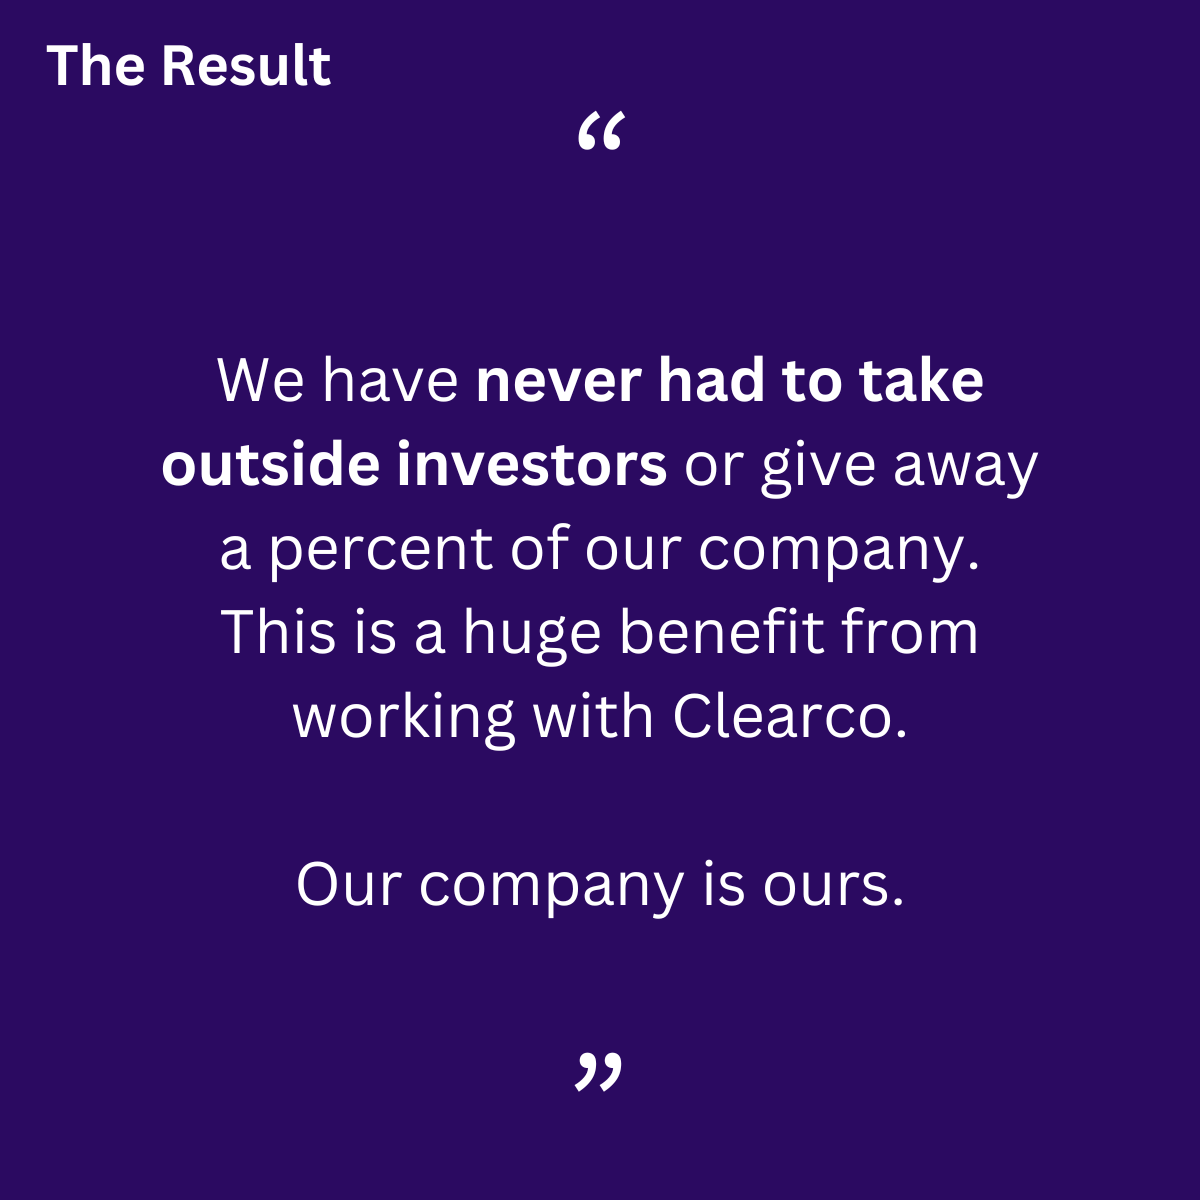 Clearco helps @CecilandLou drive 𝟐𝟓% 𝐠𝐫𝐨𝐰𝐭𝐡 in new revenue by funding in-stock inventory! 🛍️ Read more on our blog 👉 clear.co/blog/cecil-and… #ecommerce #entrepreneur #funding